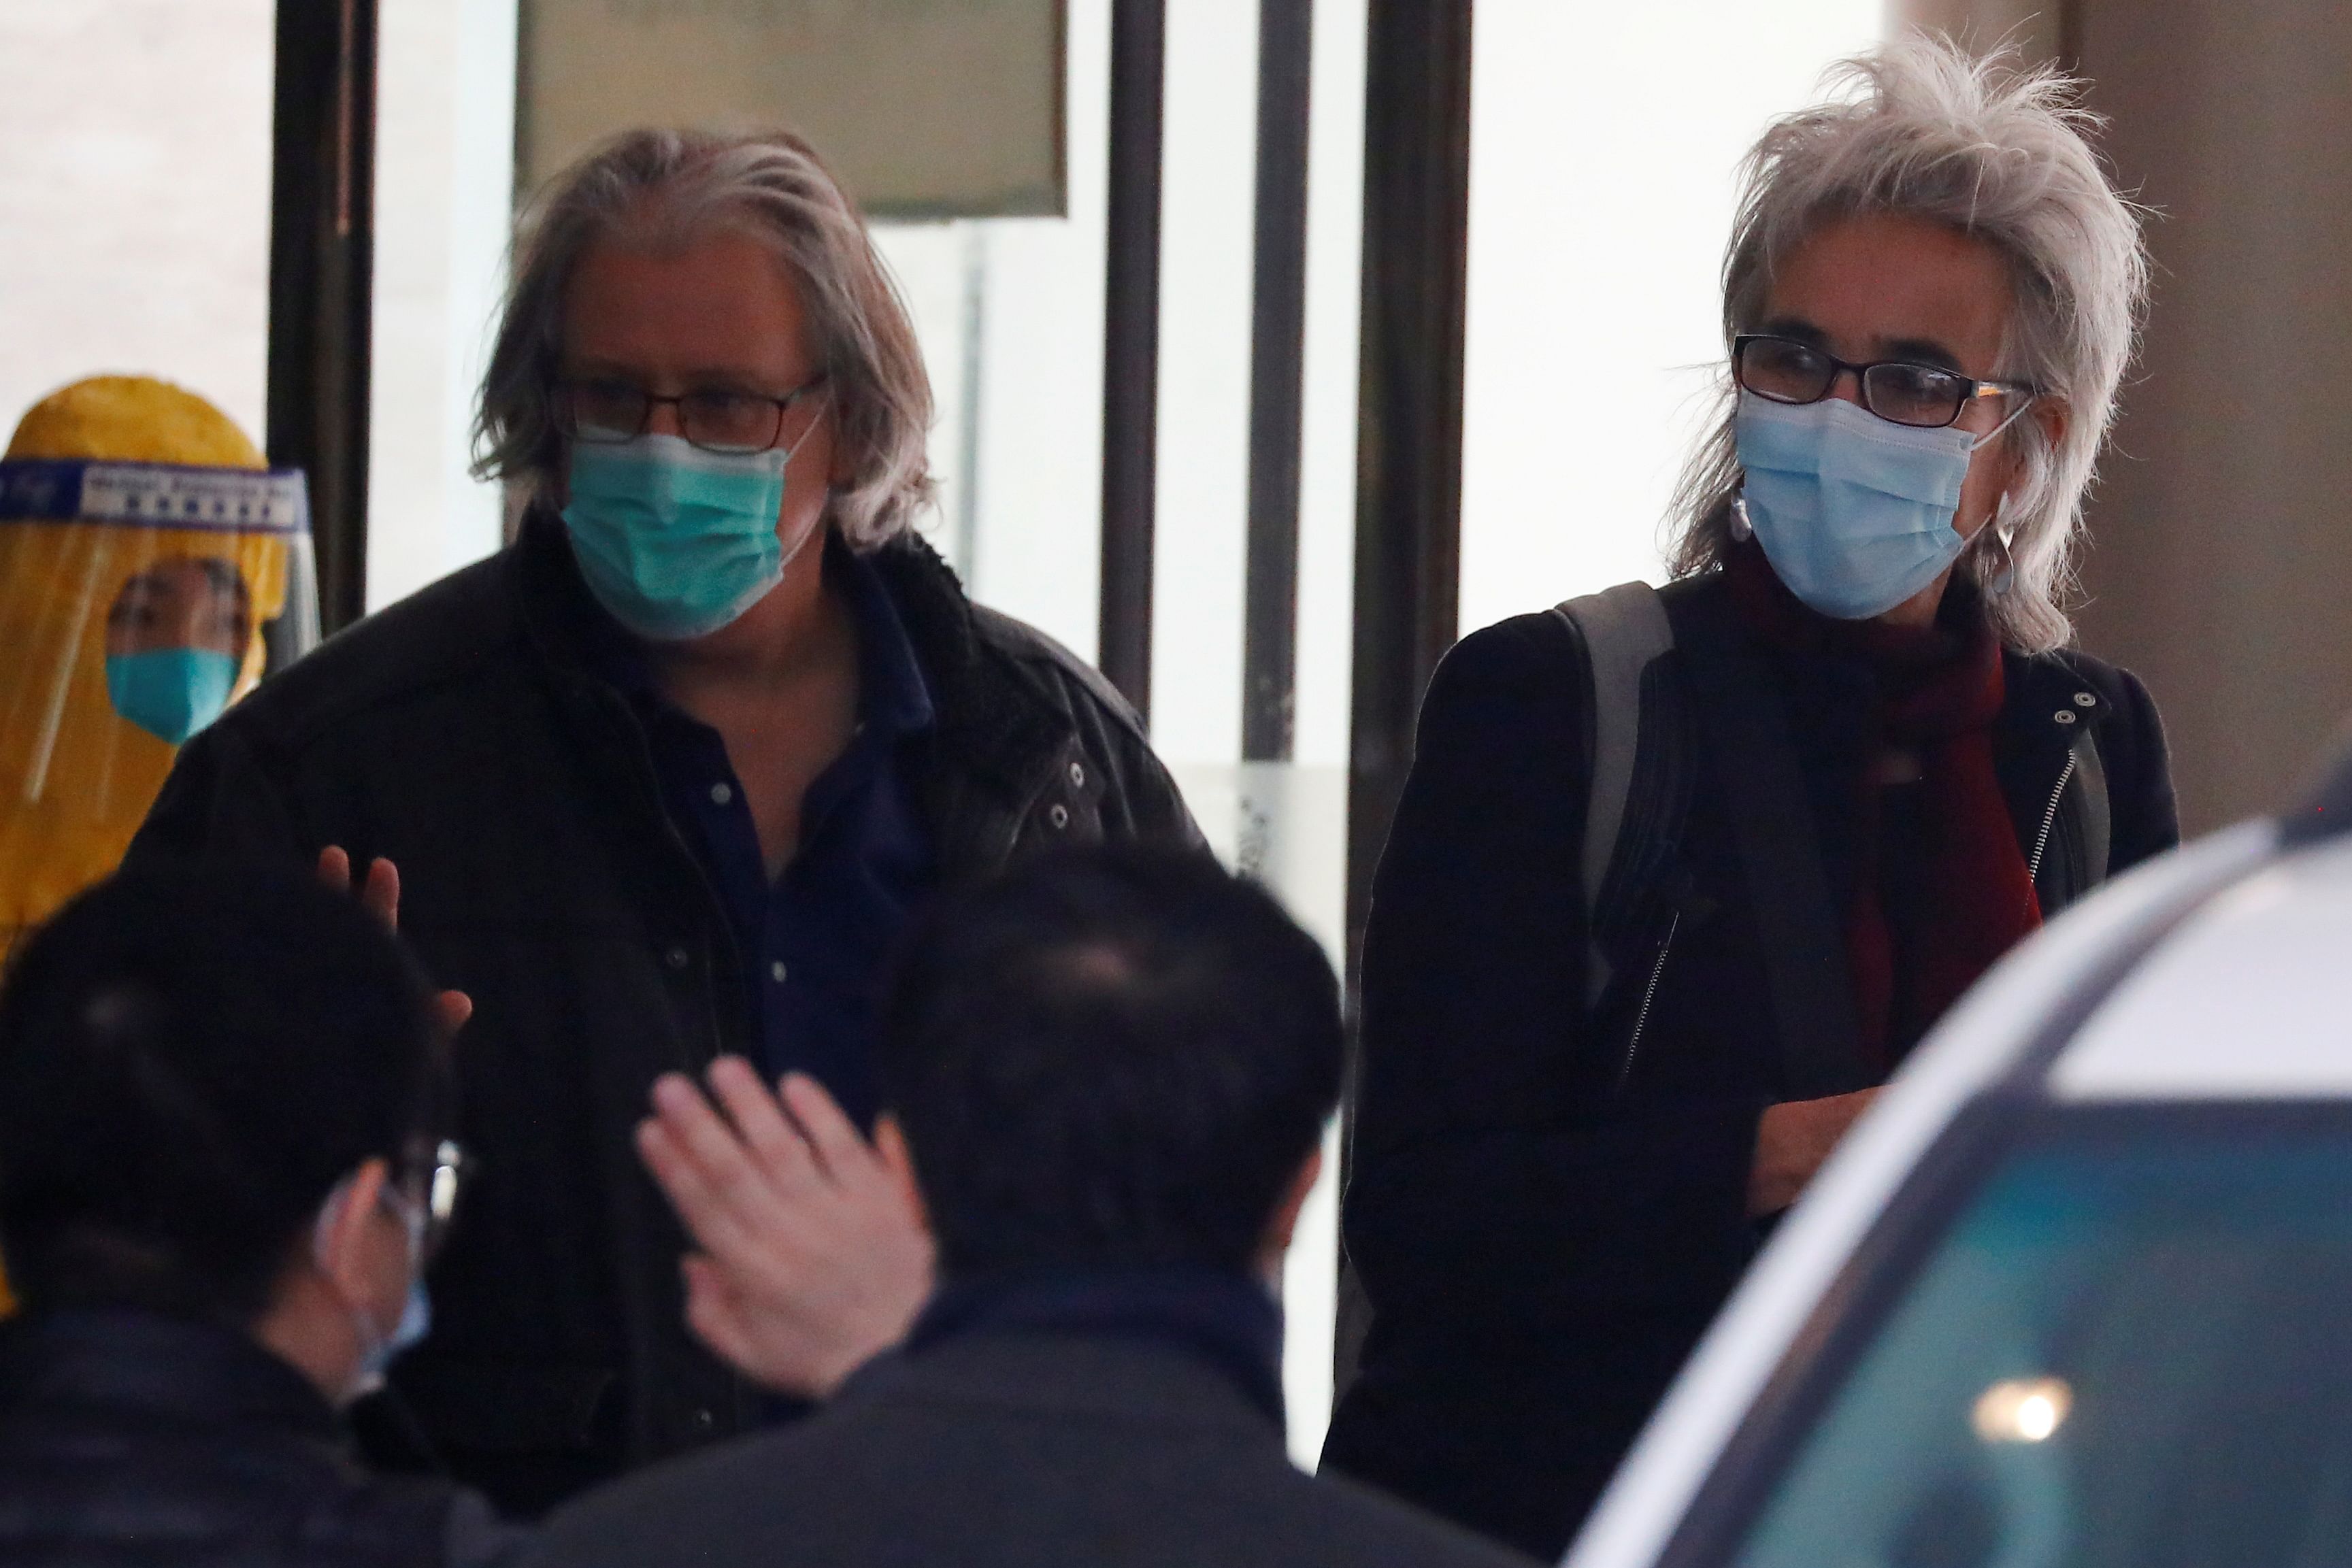 Members of the World Health Organisation (WHO) team tasked with investigating the origins of the coronavirus disease (COVID-19) pandemic leave their quarantine hotel in Wuhan, Hubei province, China January 28, 2021. Credit: REUTERS